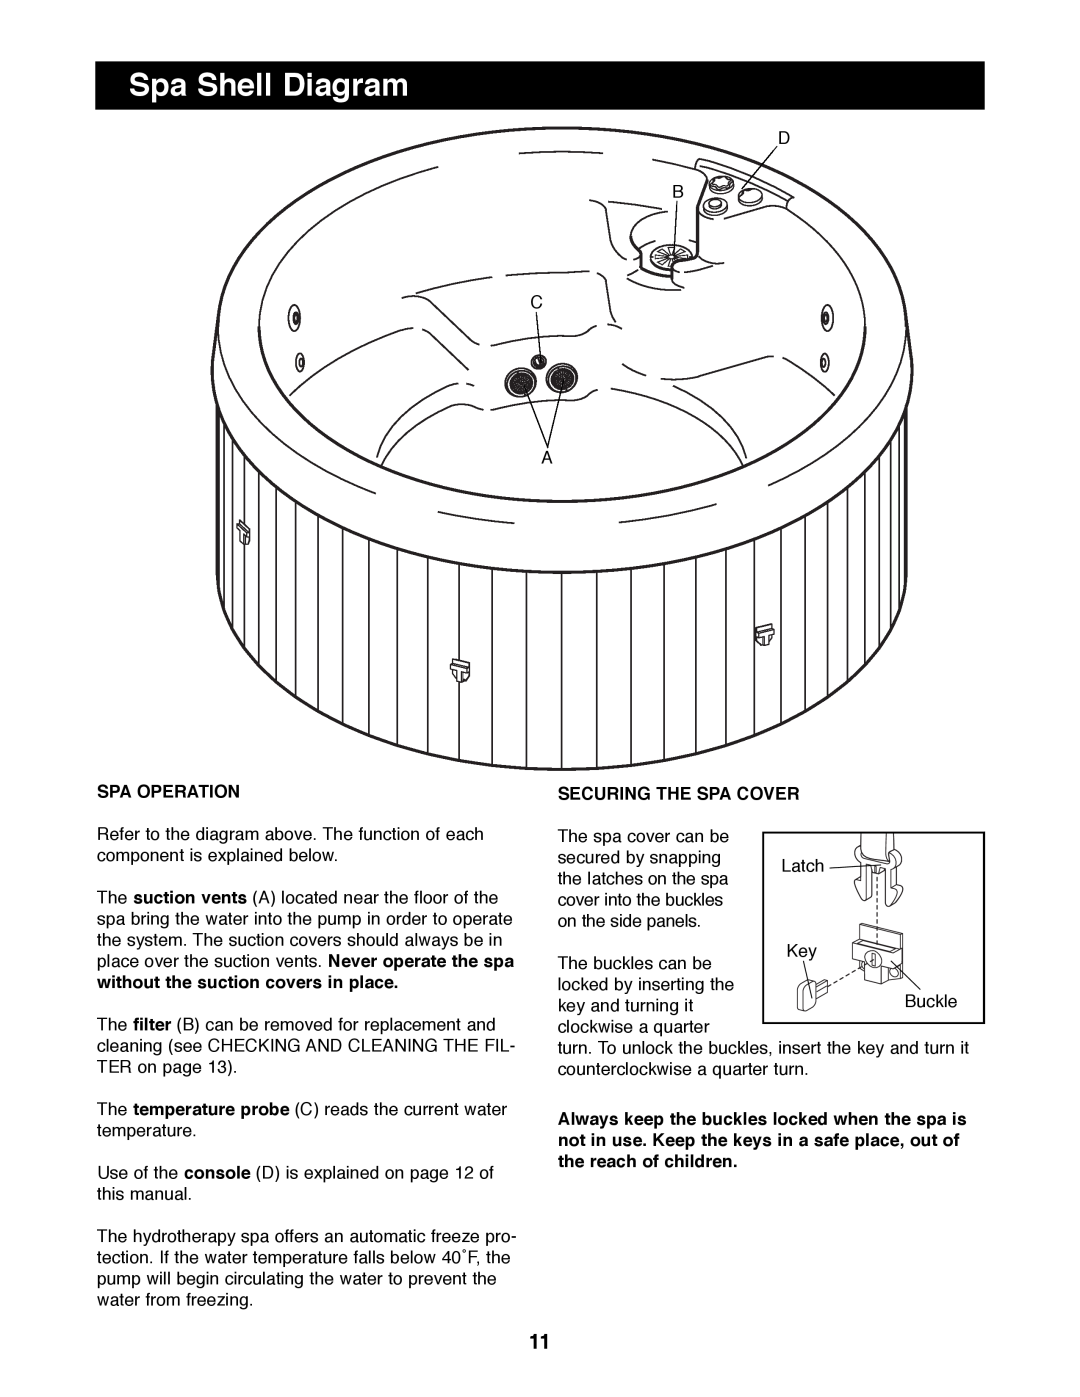 Image IMHS40090 manual Spa Shell Diagram, Spa Operation, Securing The Spa Cover, without the suction covers in place 